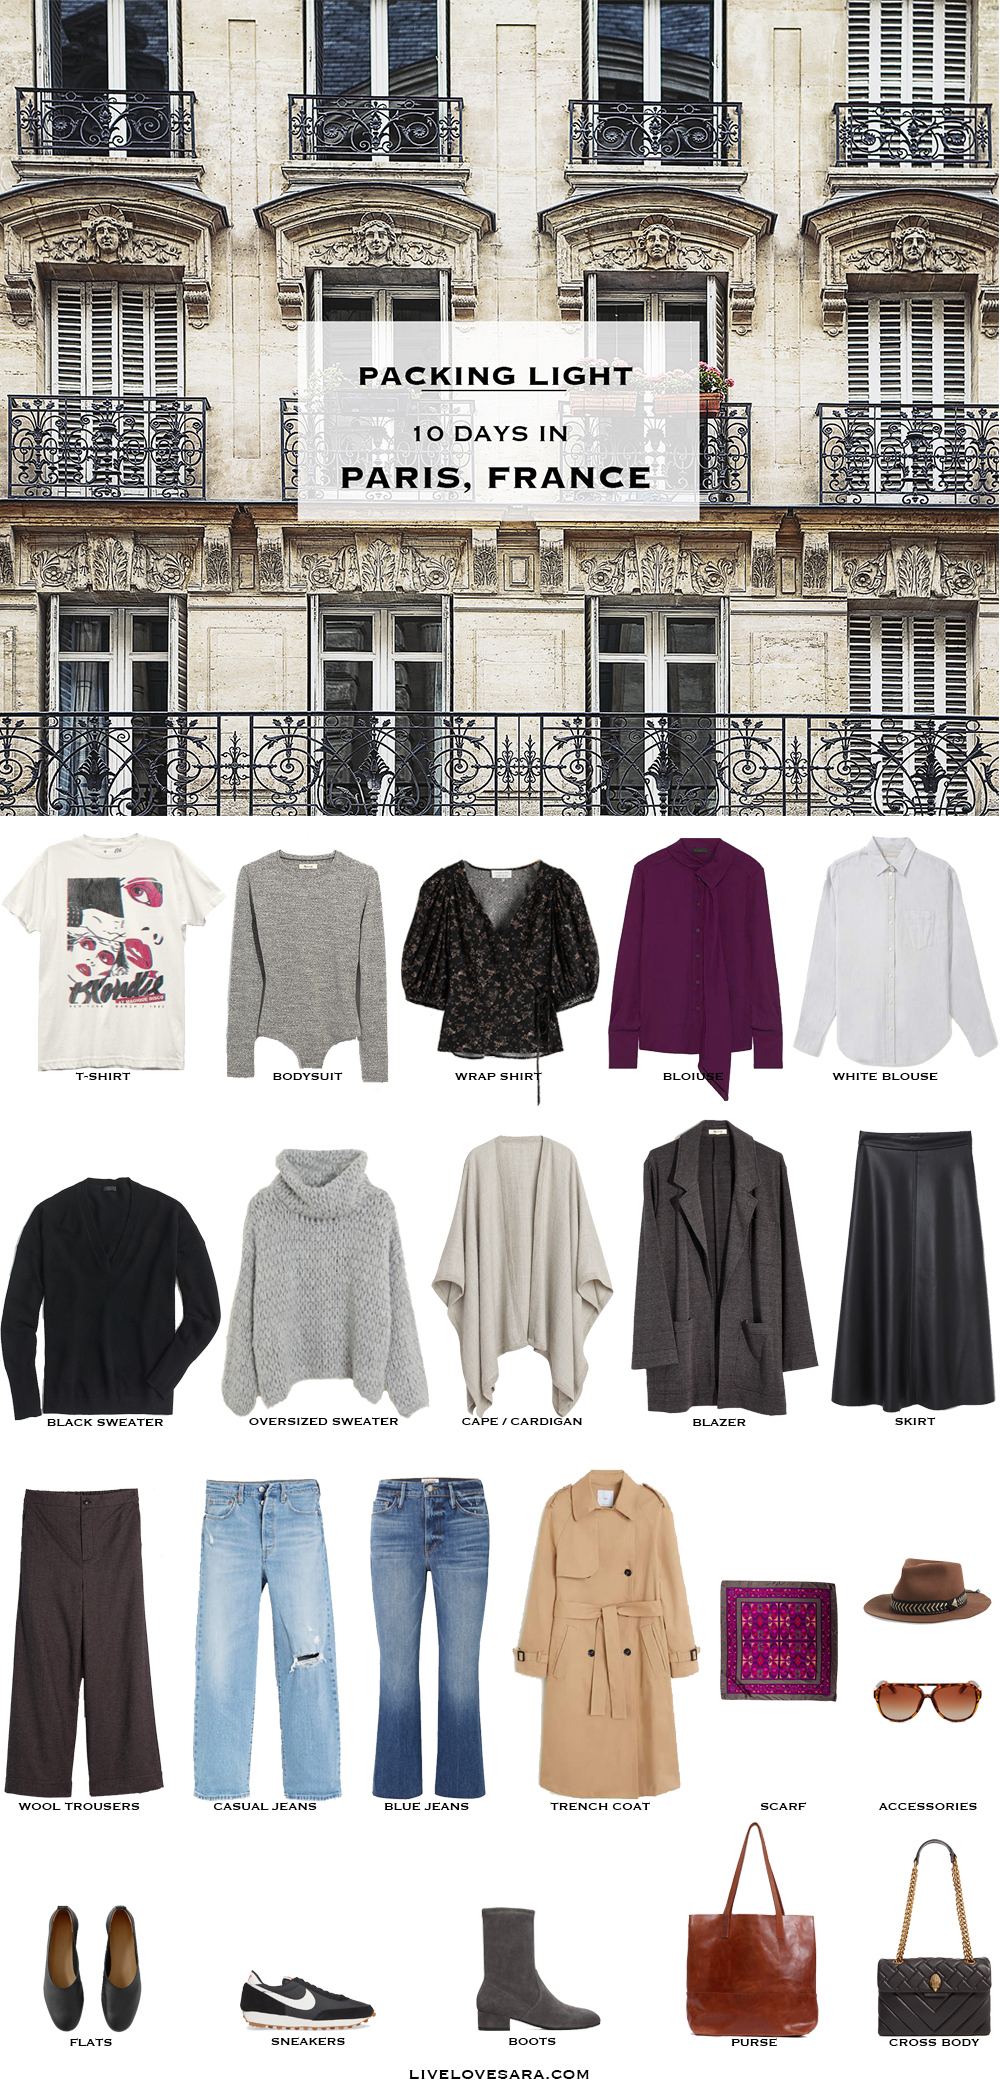 What to pack for Paris packing list | Paris Outfit Ideas | What to Wear in Paris | France Packing list | Spring Packing List | France Outfit Ideas | What to Wear in the France | Packing Light | Capsule Wardrobe | travel wardrobe | Fall packing list | travel capsule | livelovesara